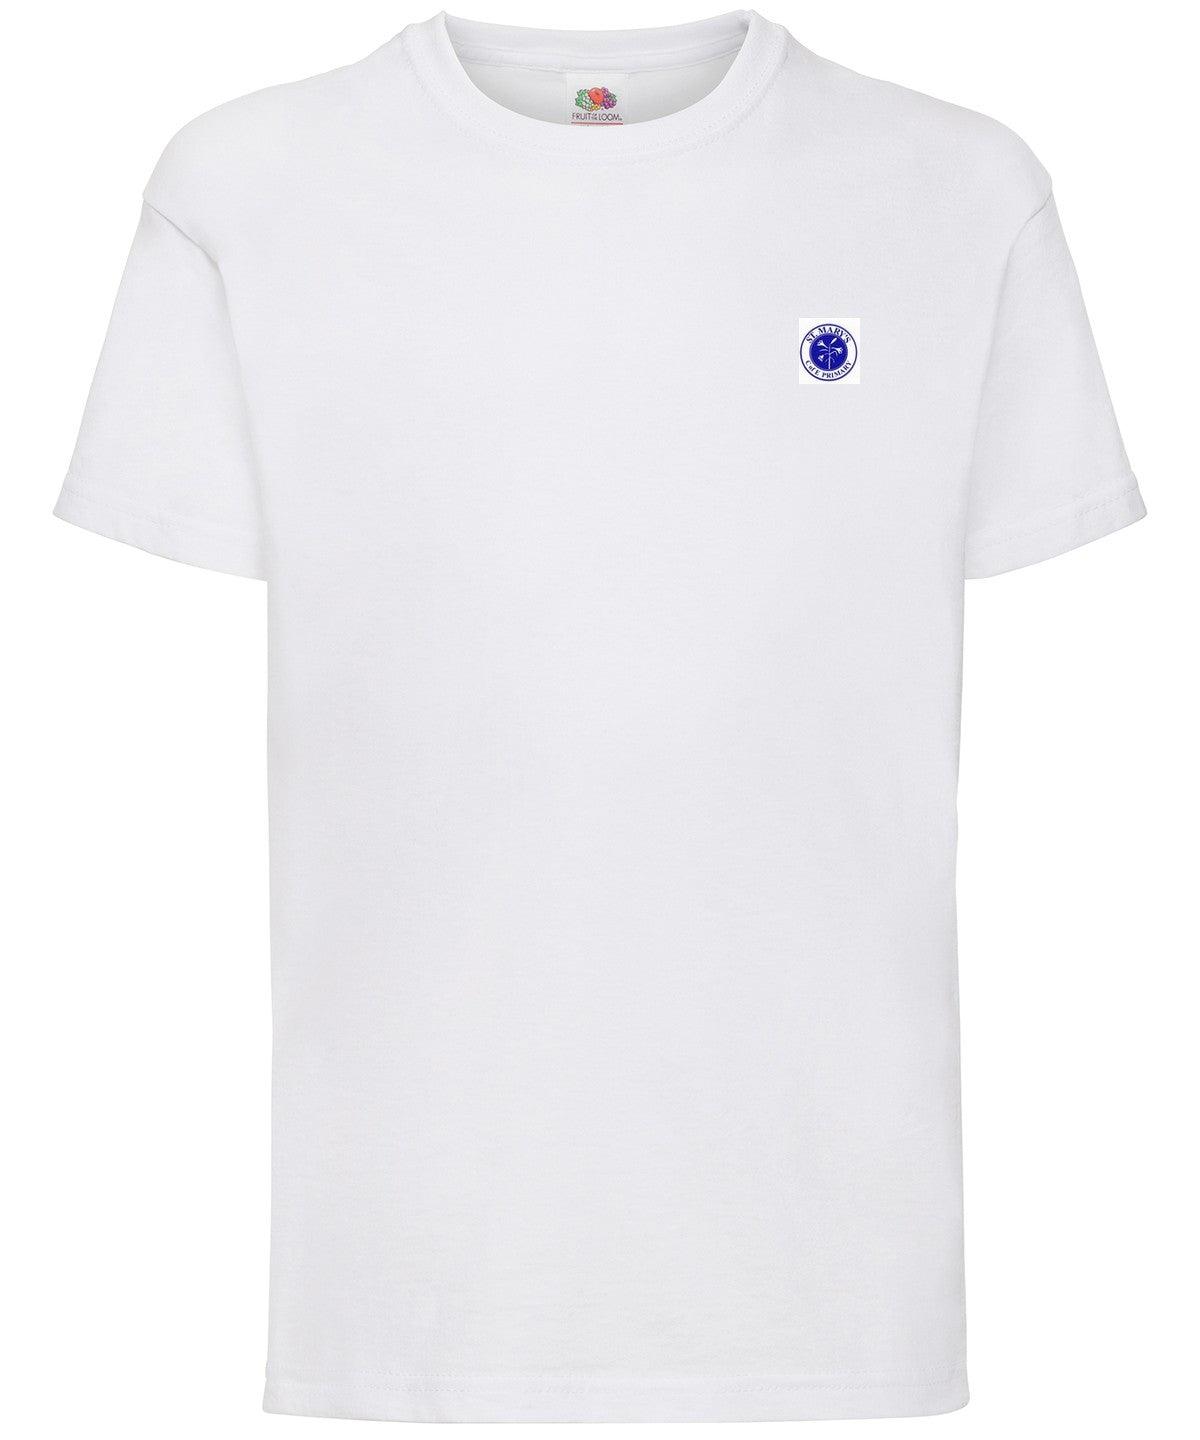 St Mary's C of E Primary School, Prittlewell - White T-Shirt with School Logo - Schoolwear Centres | School Uniform Centres